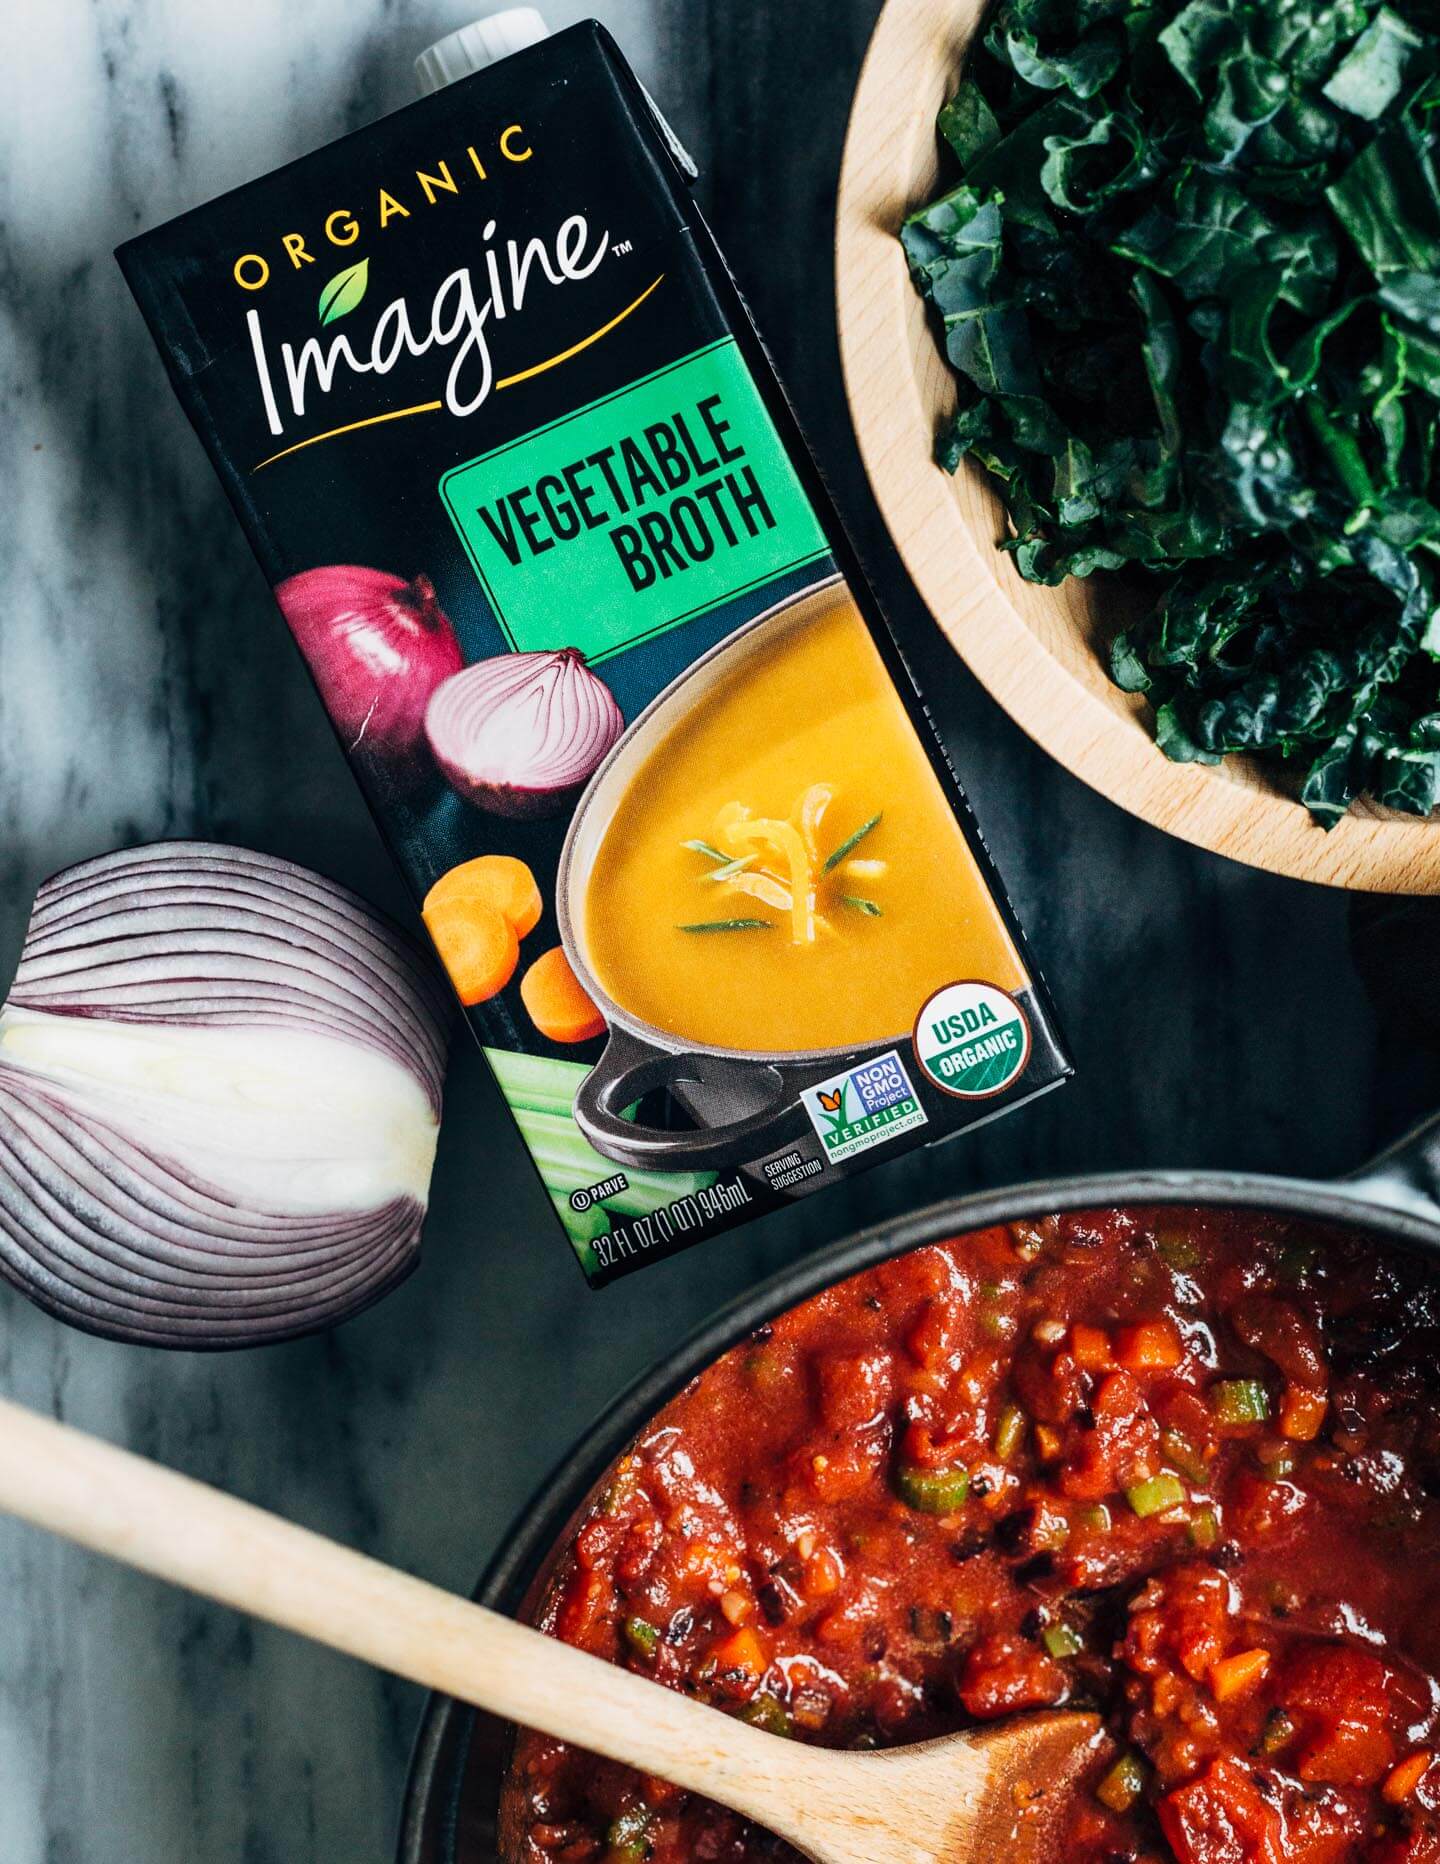 A meal-worthy vegan vegetable pasta soup with a little bit of everything: delicious vegetable broth, fire-roasted tomatoes, kale, carrots, thyme, and toothsome pasta.